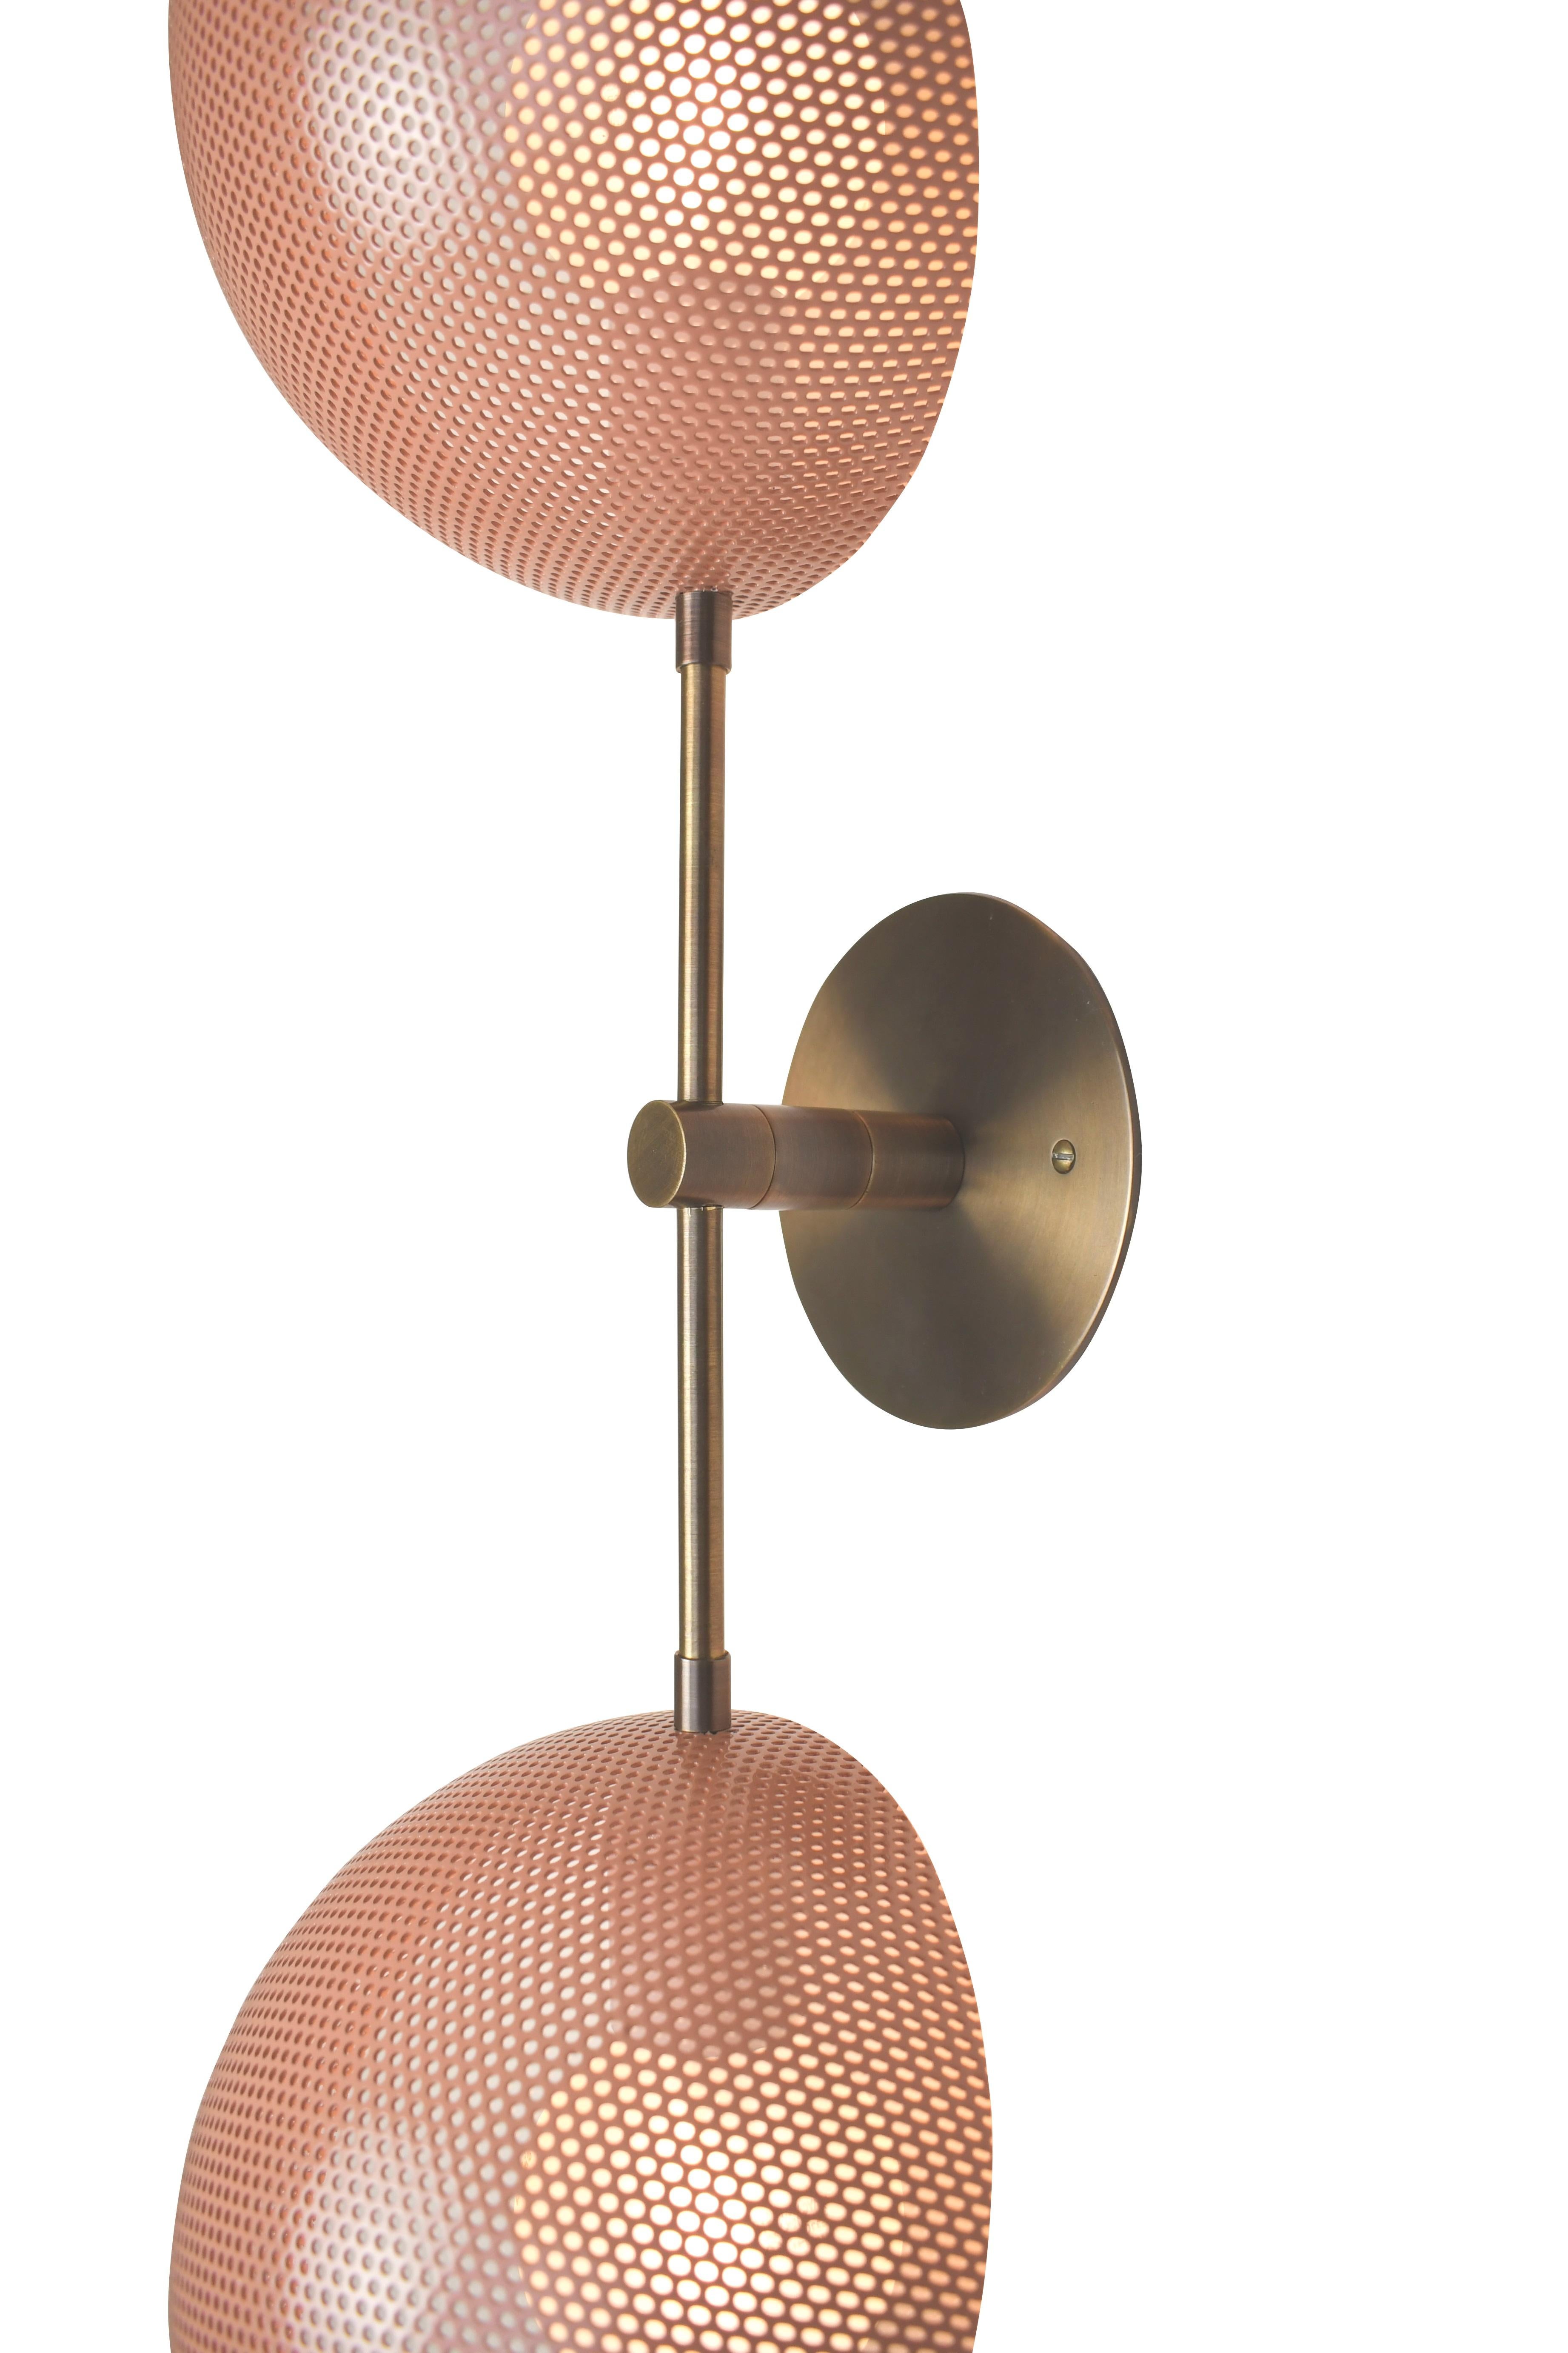 The Axial sconce conveys a strong modern design defined by balance and equilibrium. Axial features two bowl-shaped shades fabricated of spun metal mesh, tilted at an angle, mimicking the axial tilt of the planets in orbit. This line, designed in